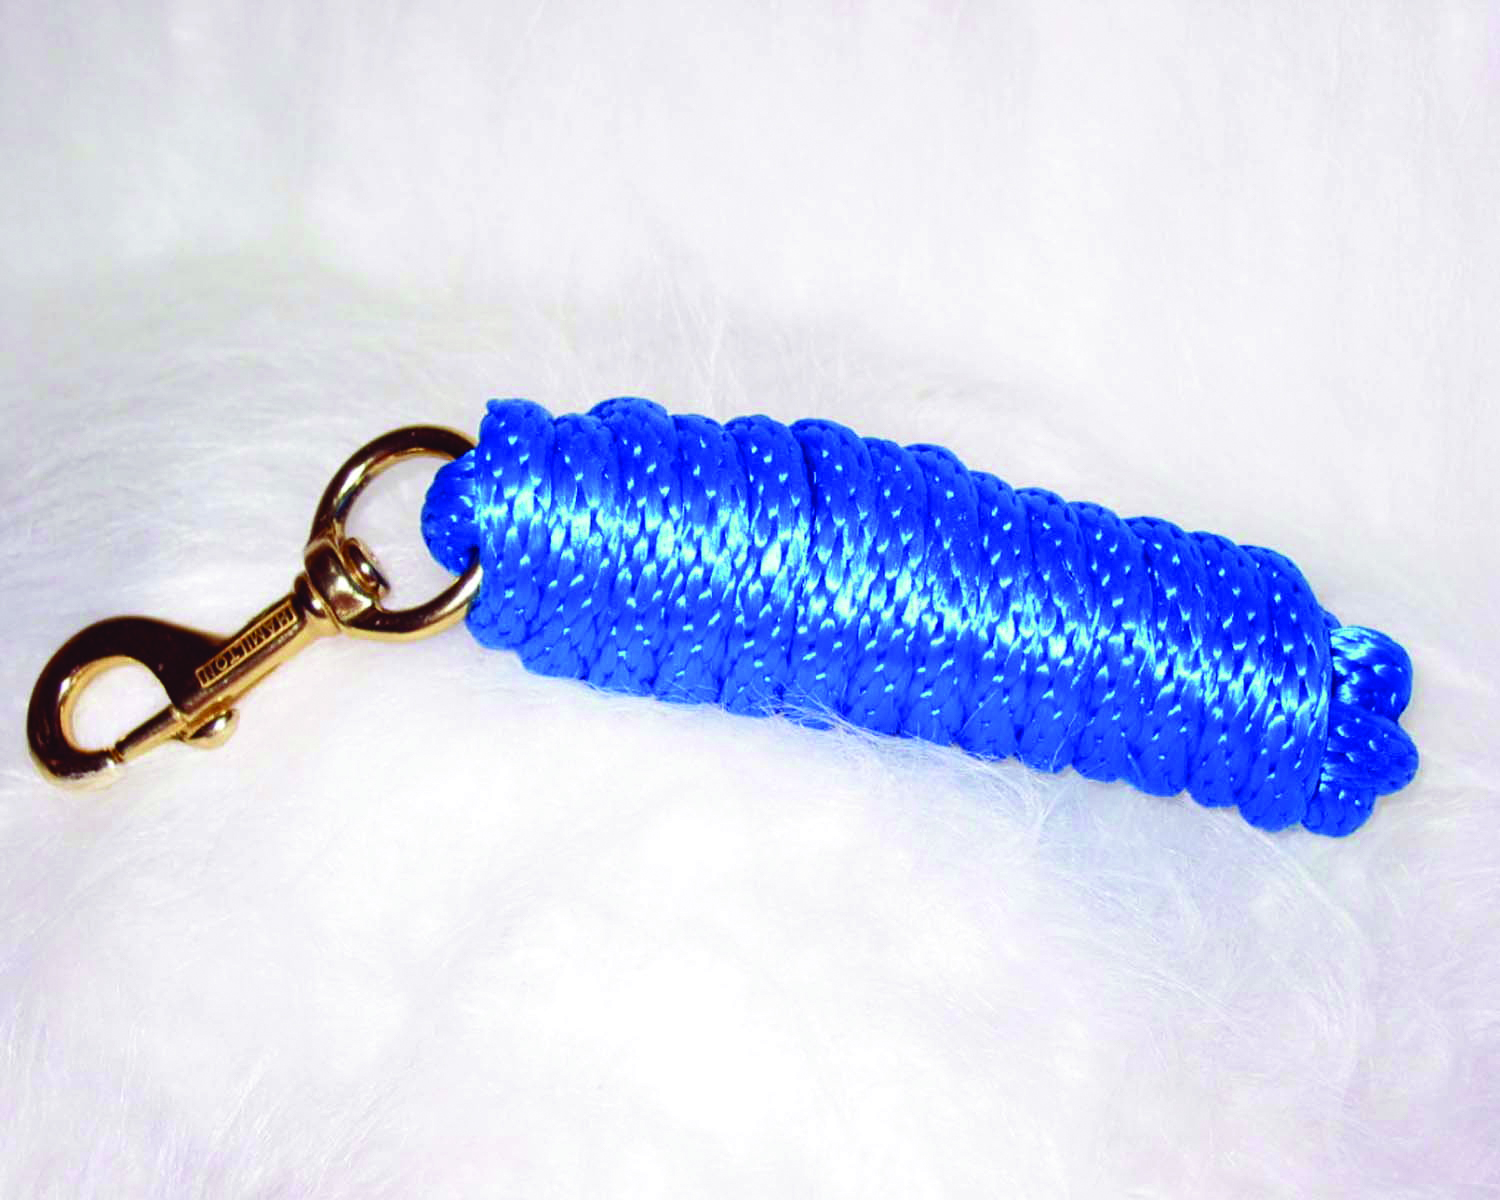 Rope Lead W/bolt 10ft - Blue